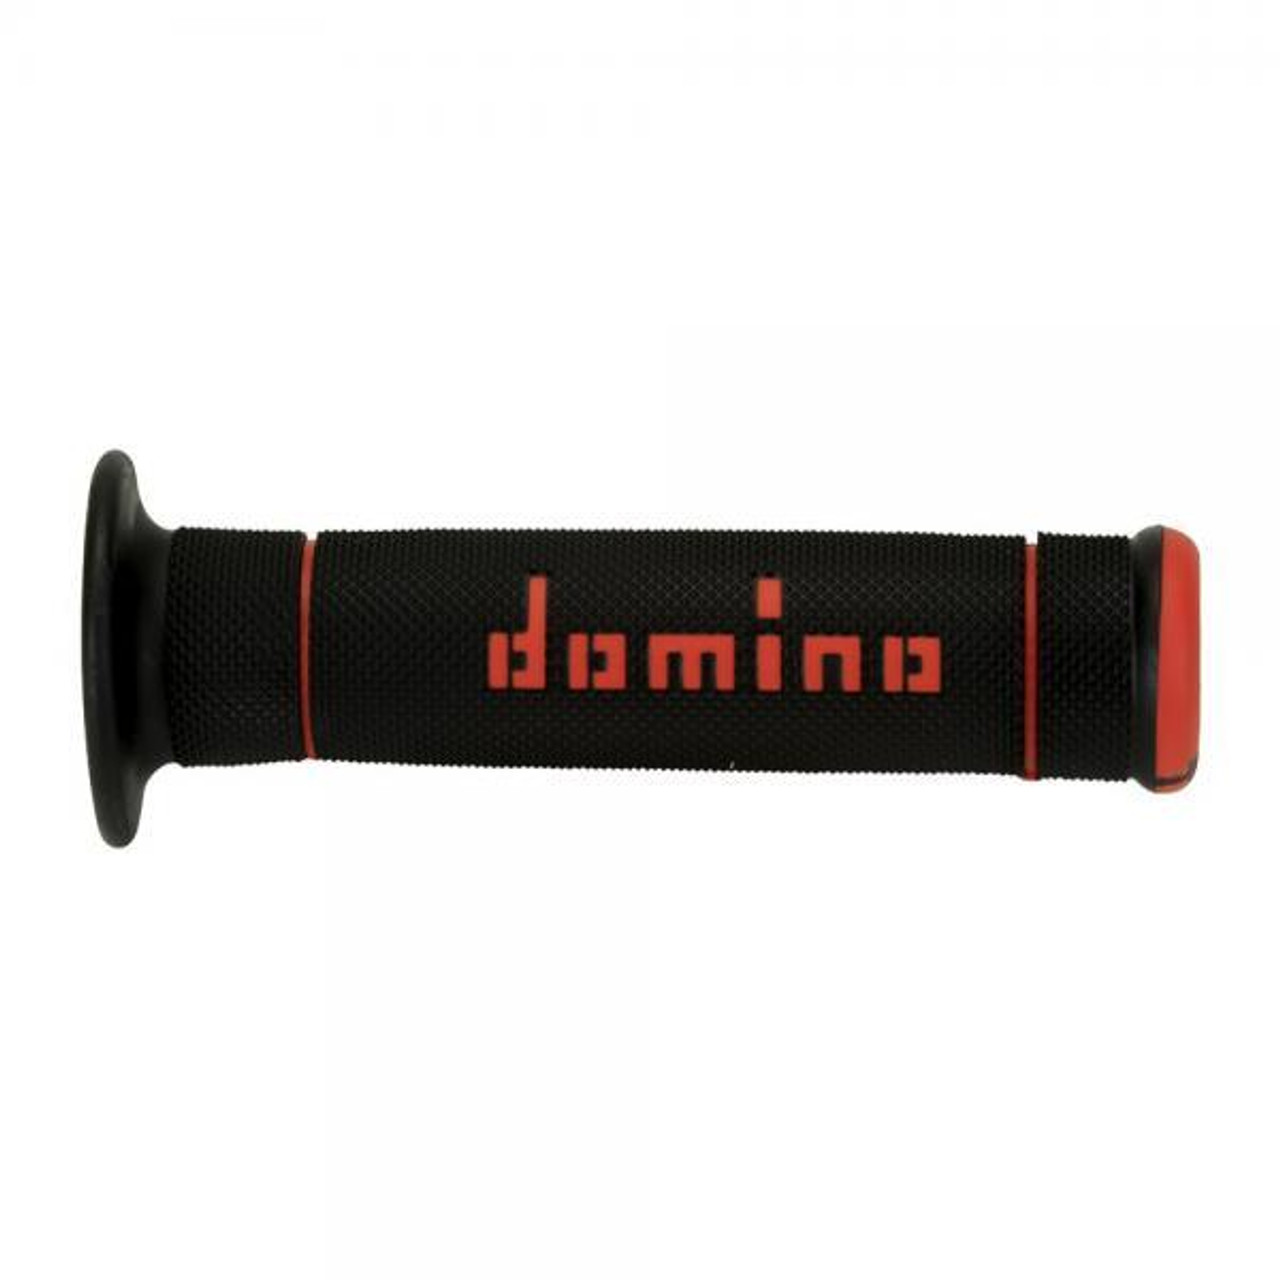 TG2Black/red two component grips